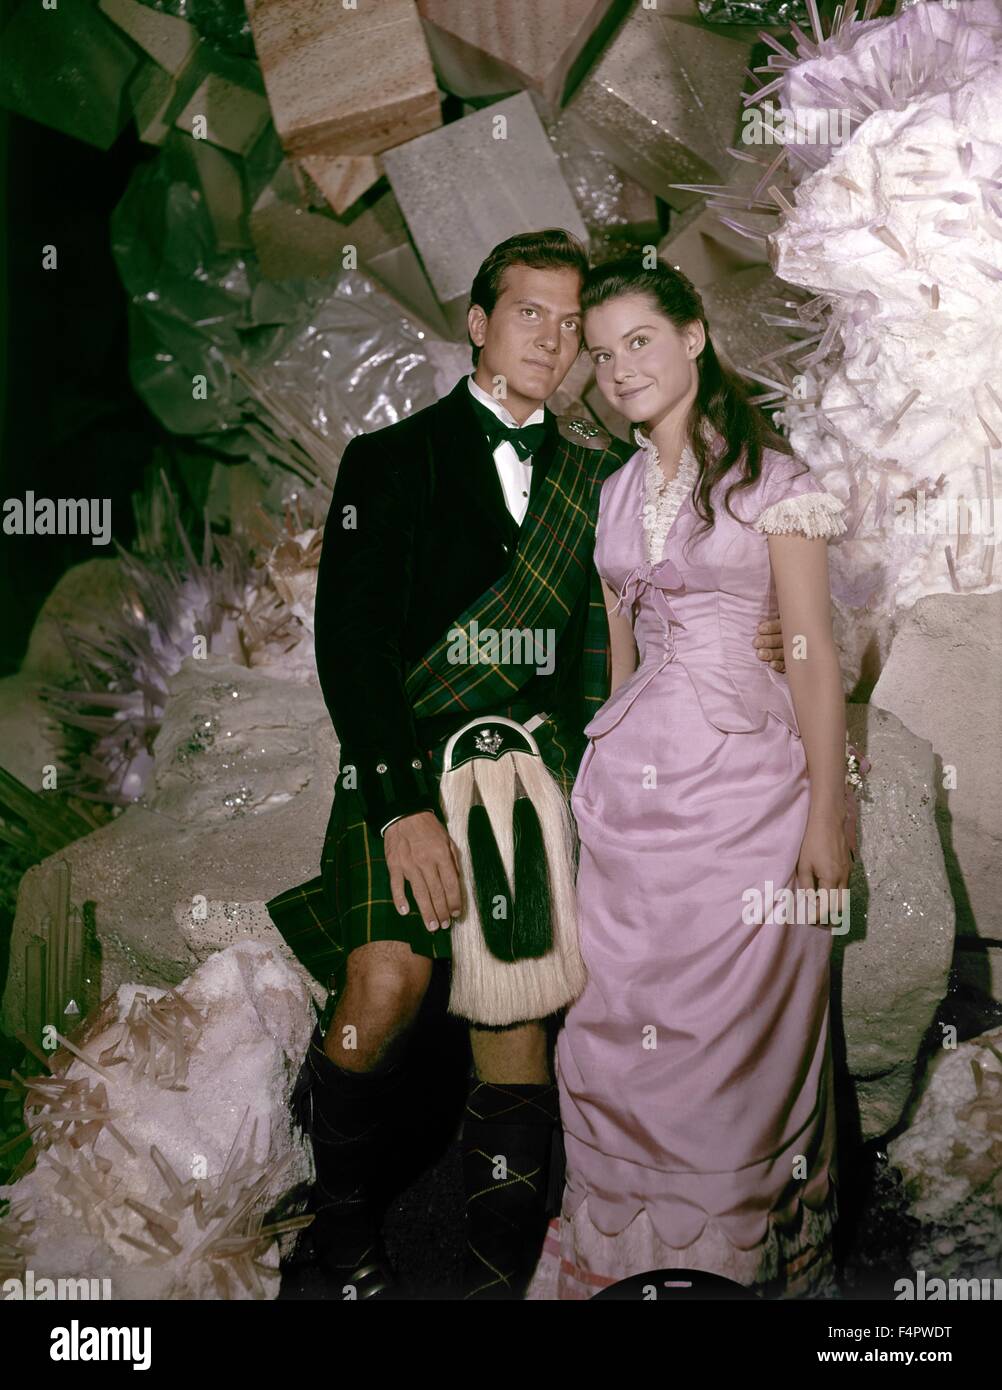 Pat Boone and Diane Baker / Journey to the Center of the Earth / 1959 directed by Henry Levin  [Twentieth Century Fox Film Corpo] Stock Photo